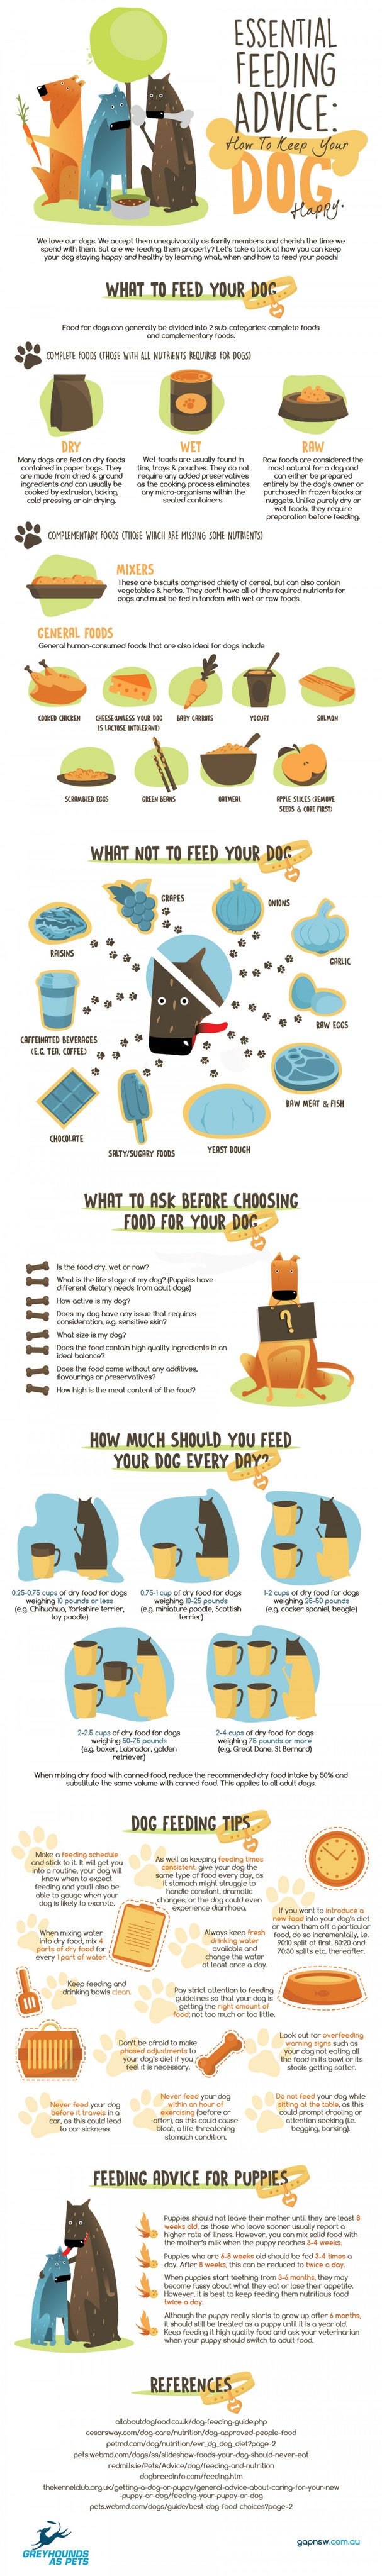 Essential Feeding Advice: How To Keep Your Dog Happy